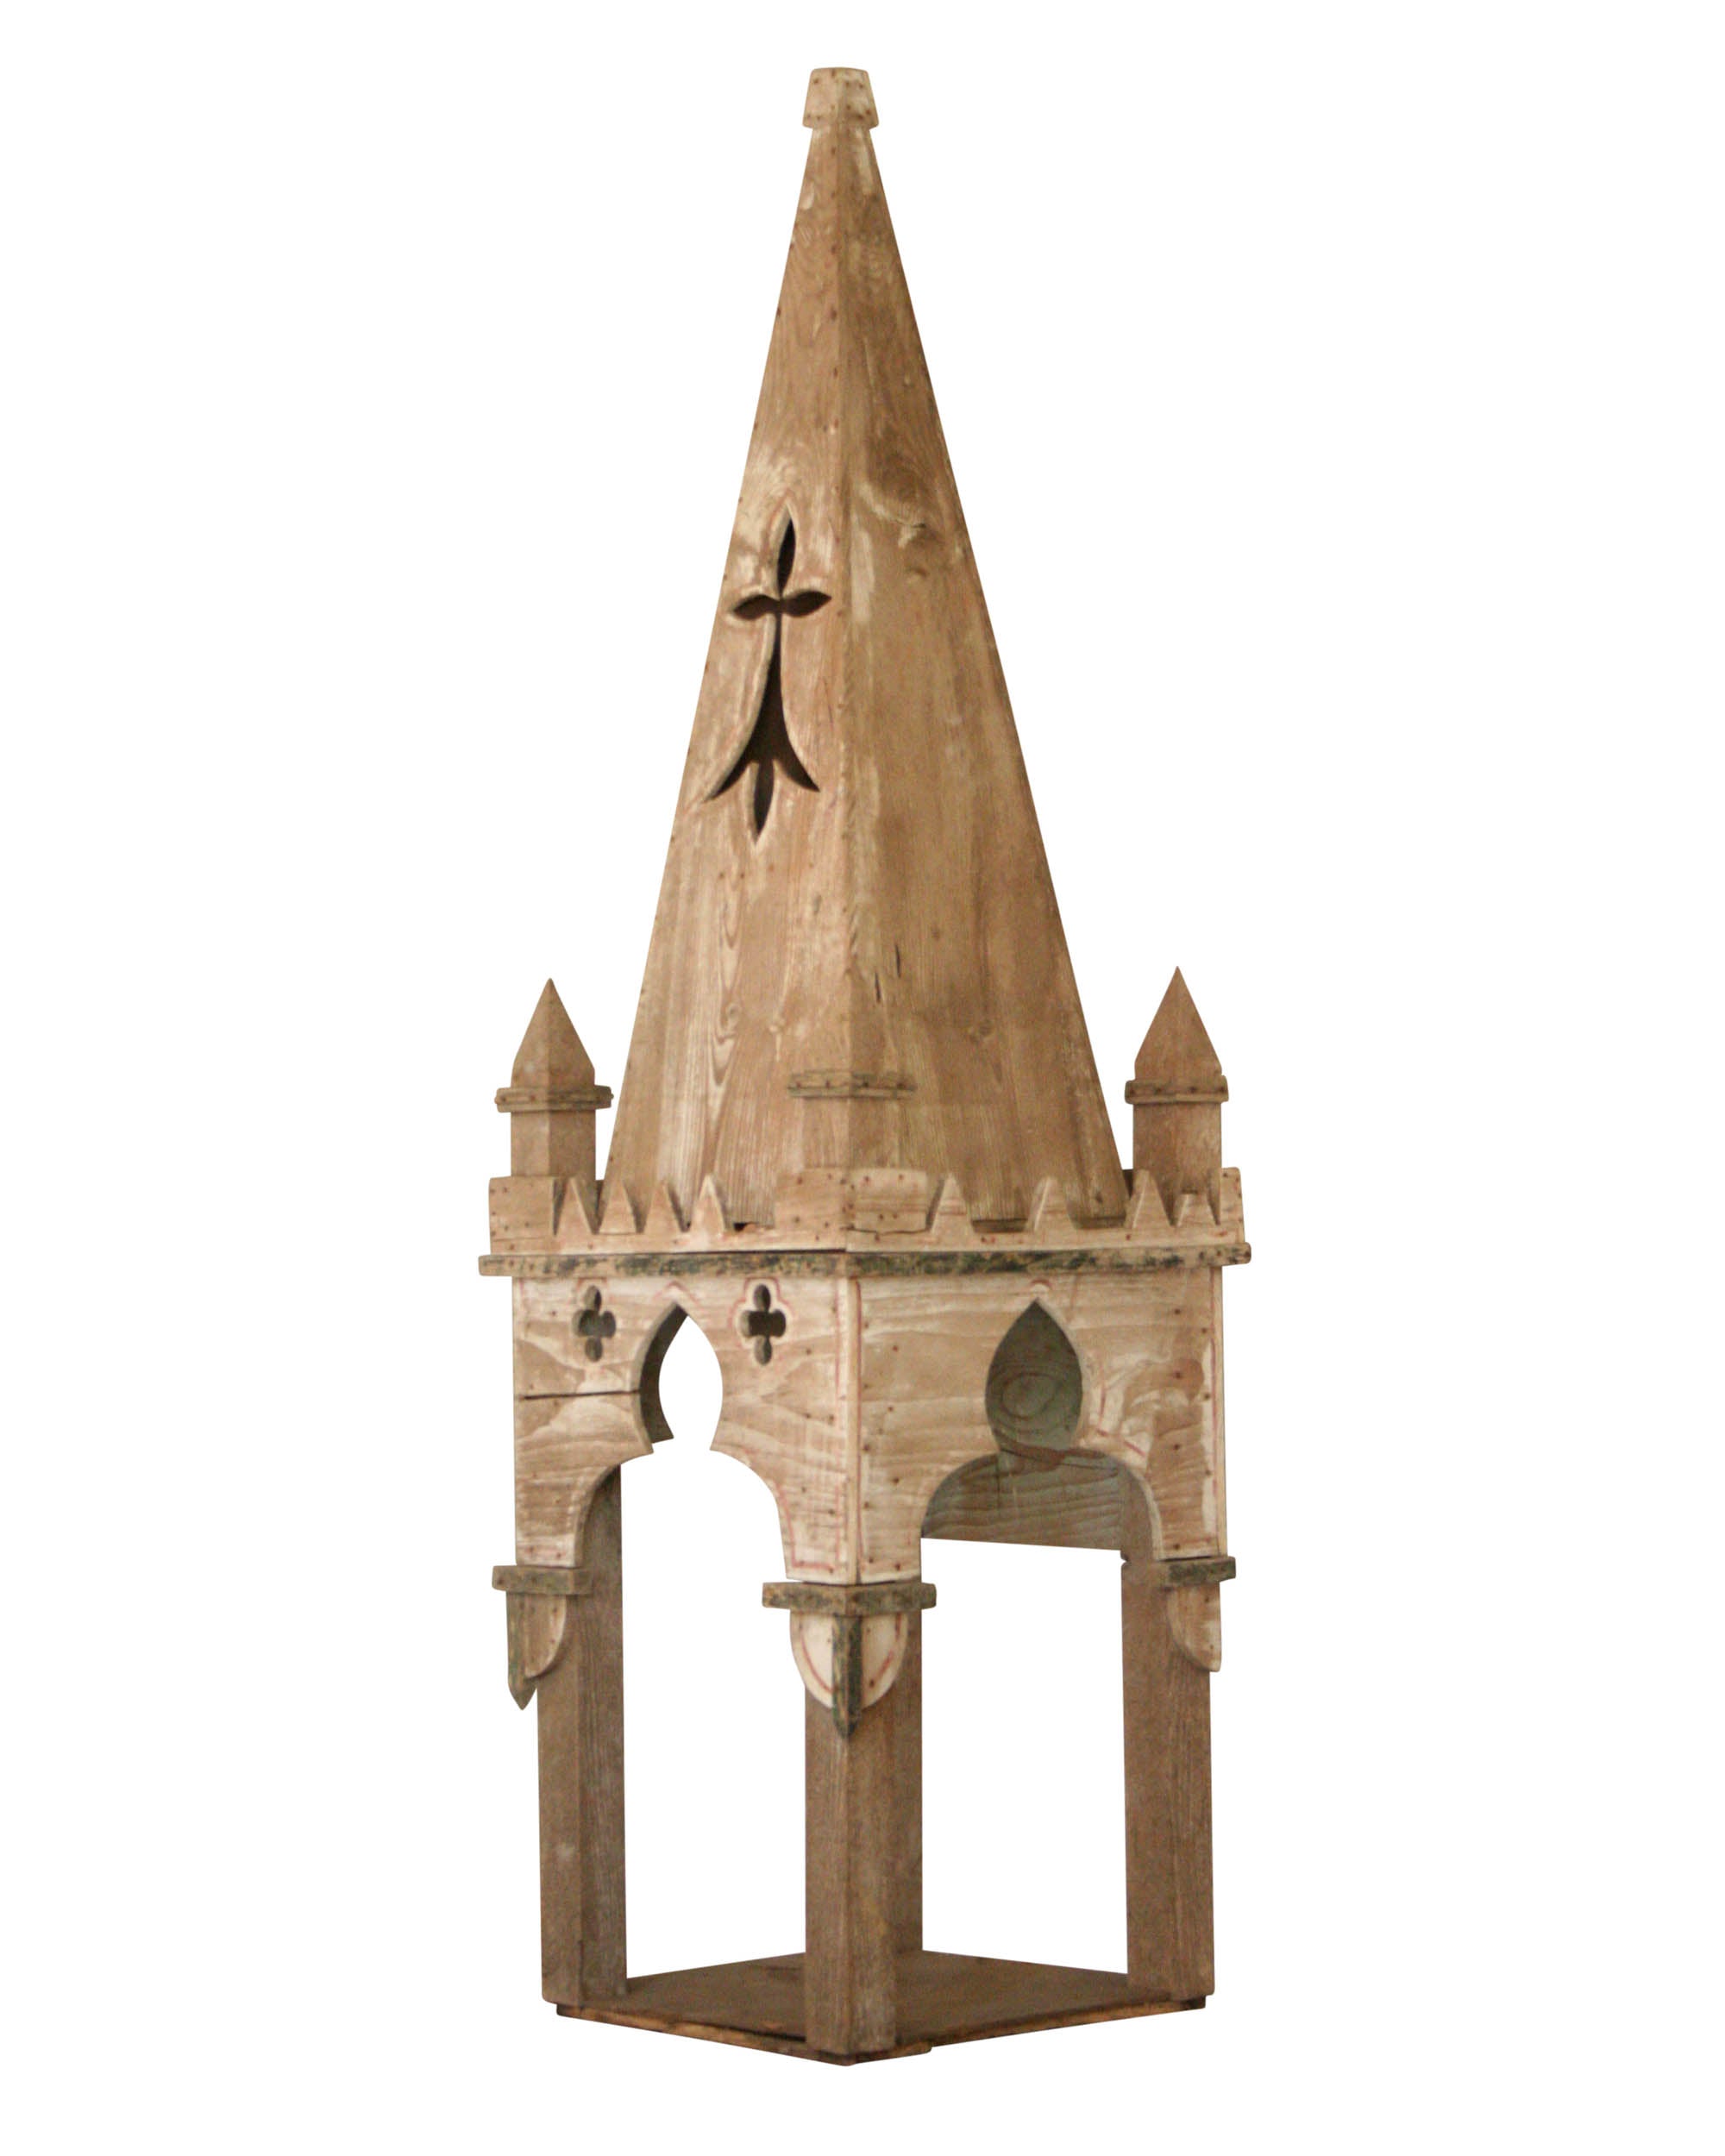 Wood mockup shaped as an old-fashioned bell tower